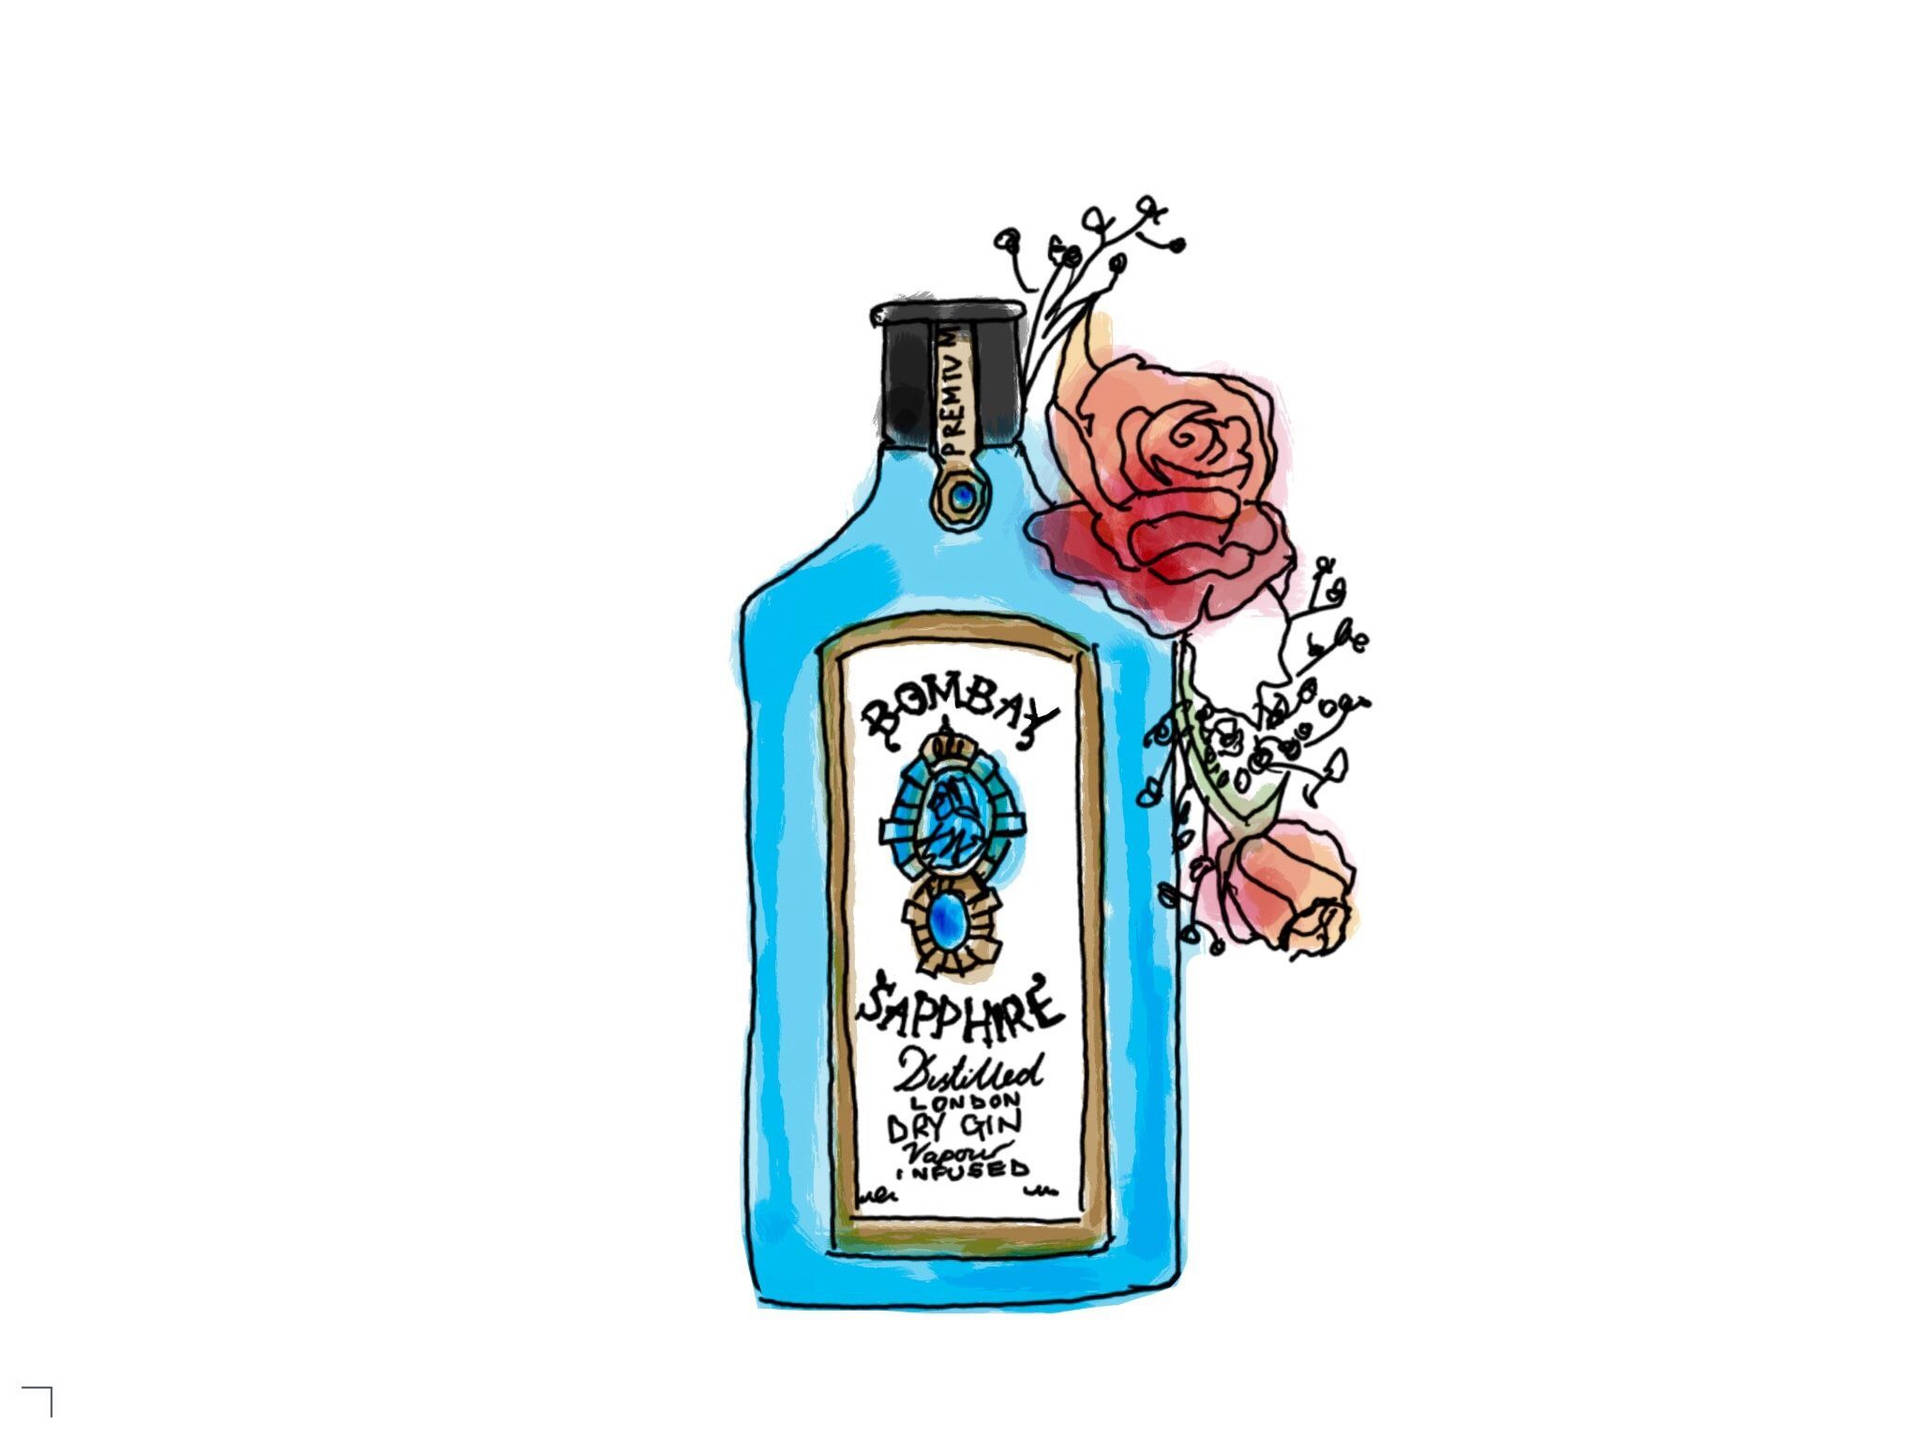 Exquisite Drawing of Bombay Sapphire Bottle Wallpaper